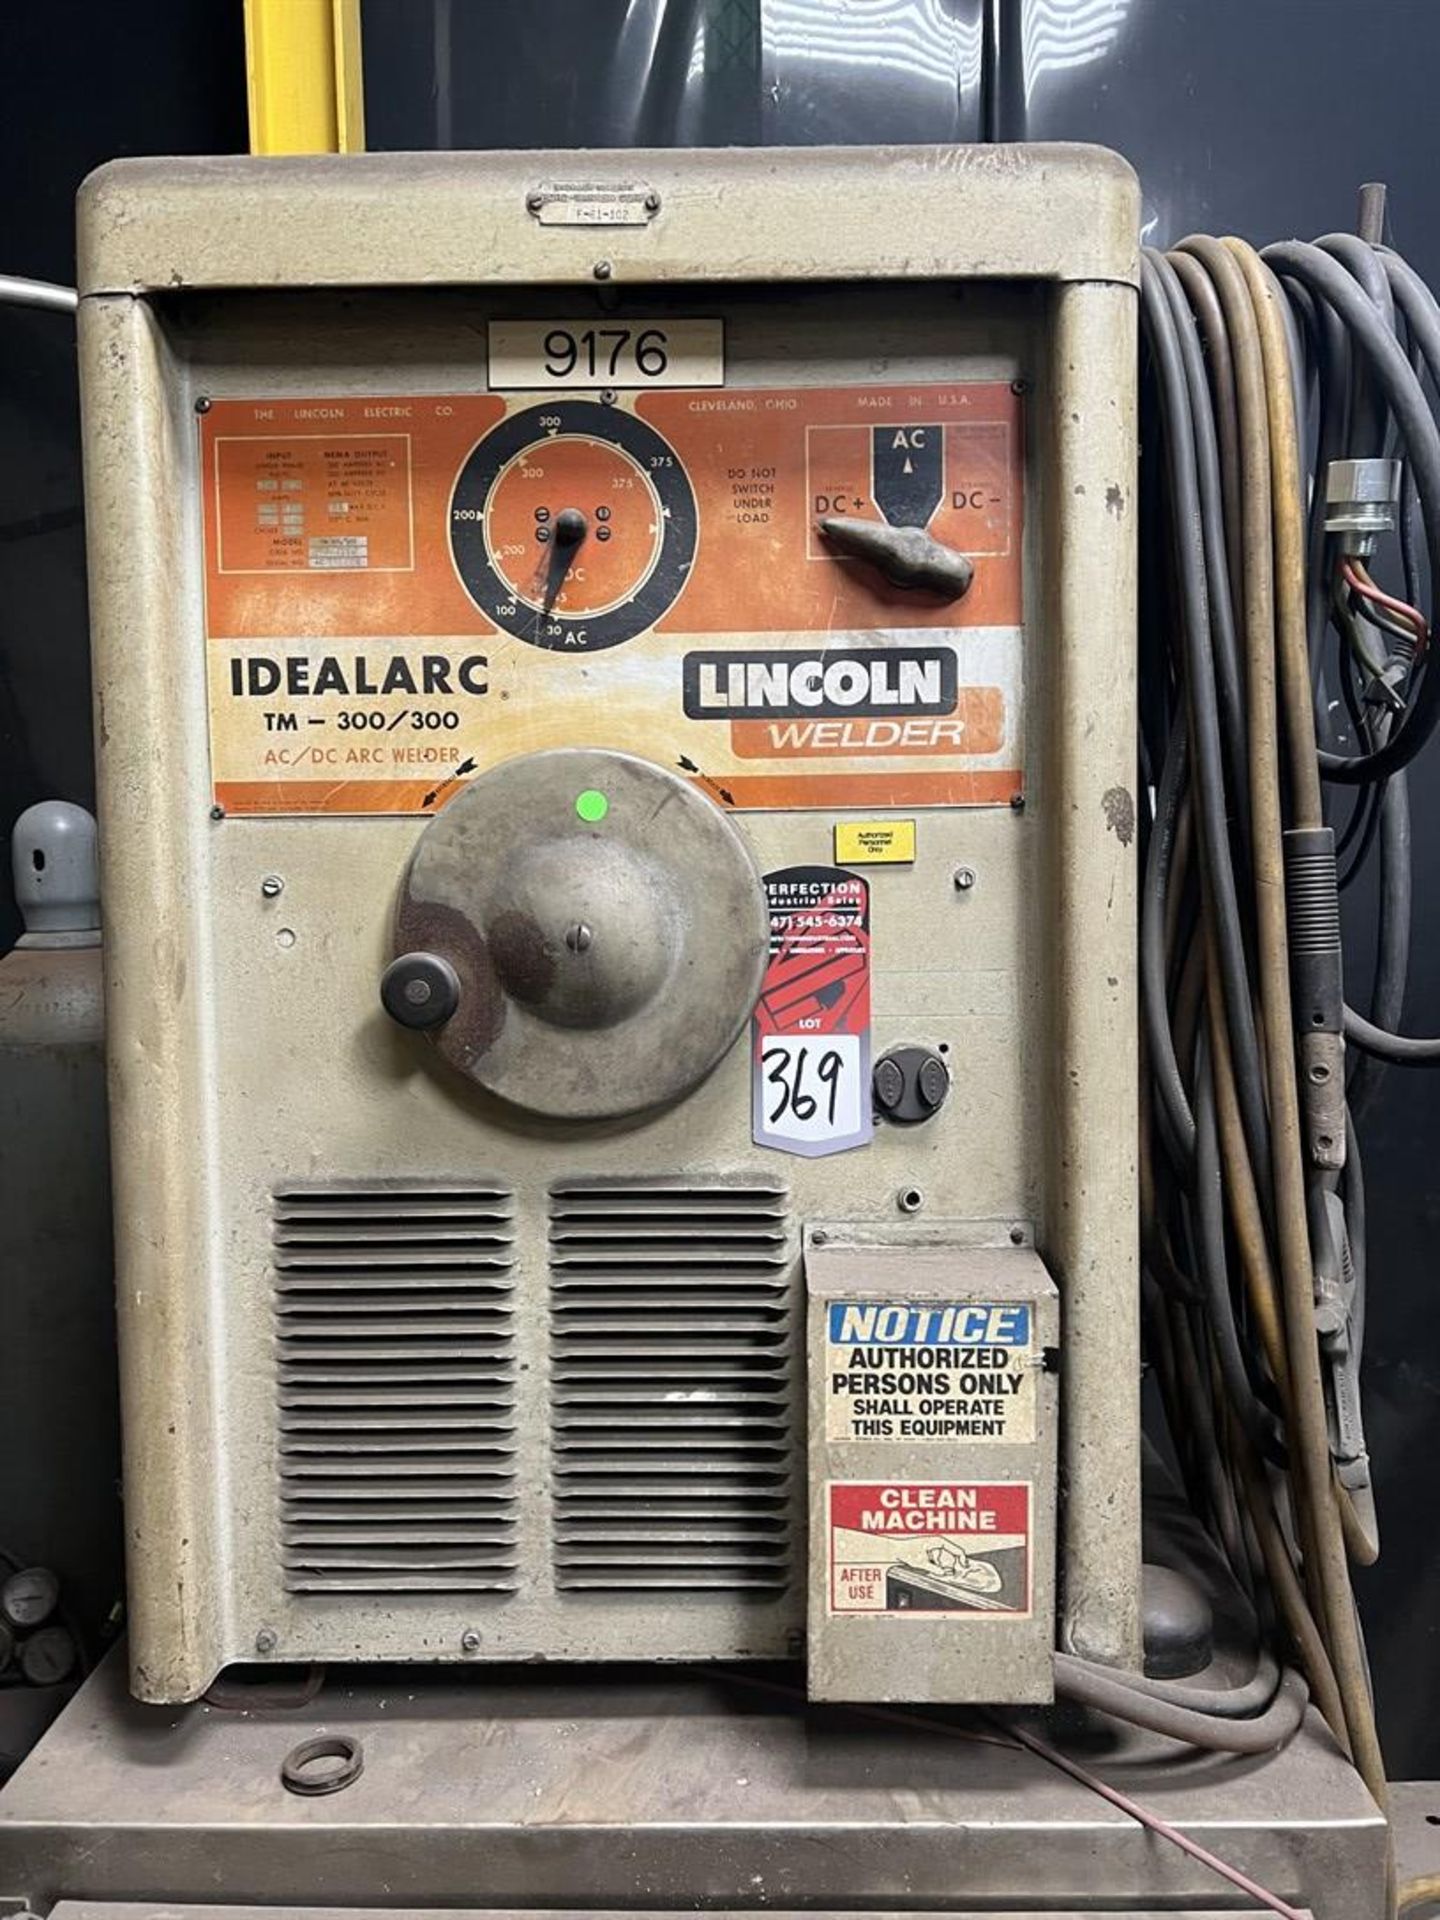 LINCOLN IDEALARC TM-300/300 Welding Power Source, s/n AC-159006 - Image 2 of 3